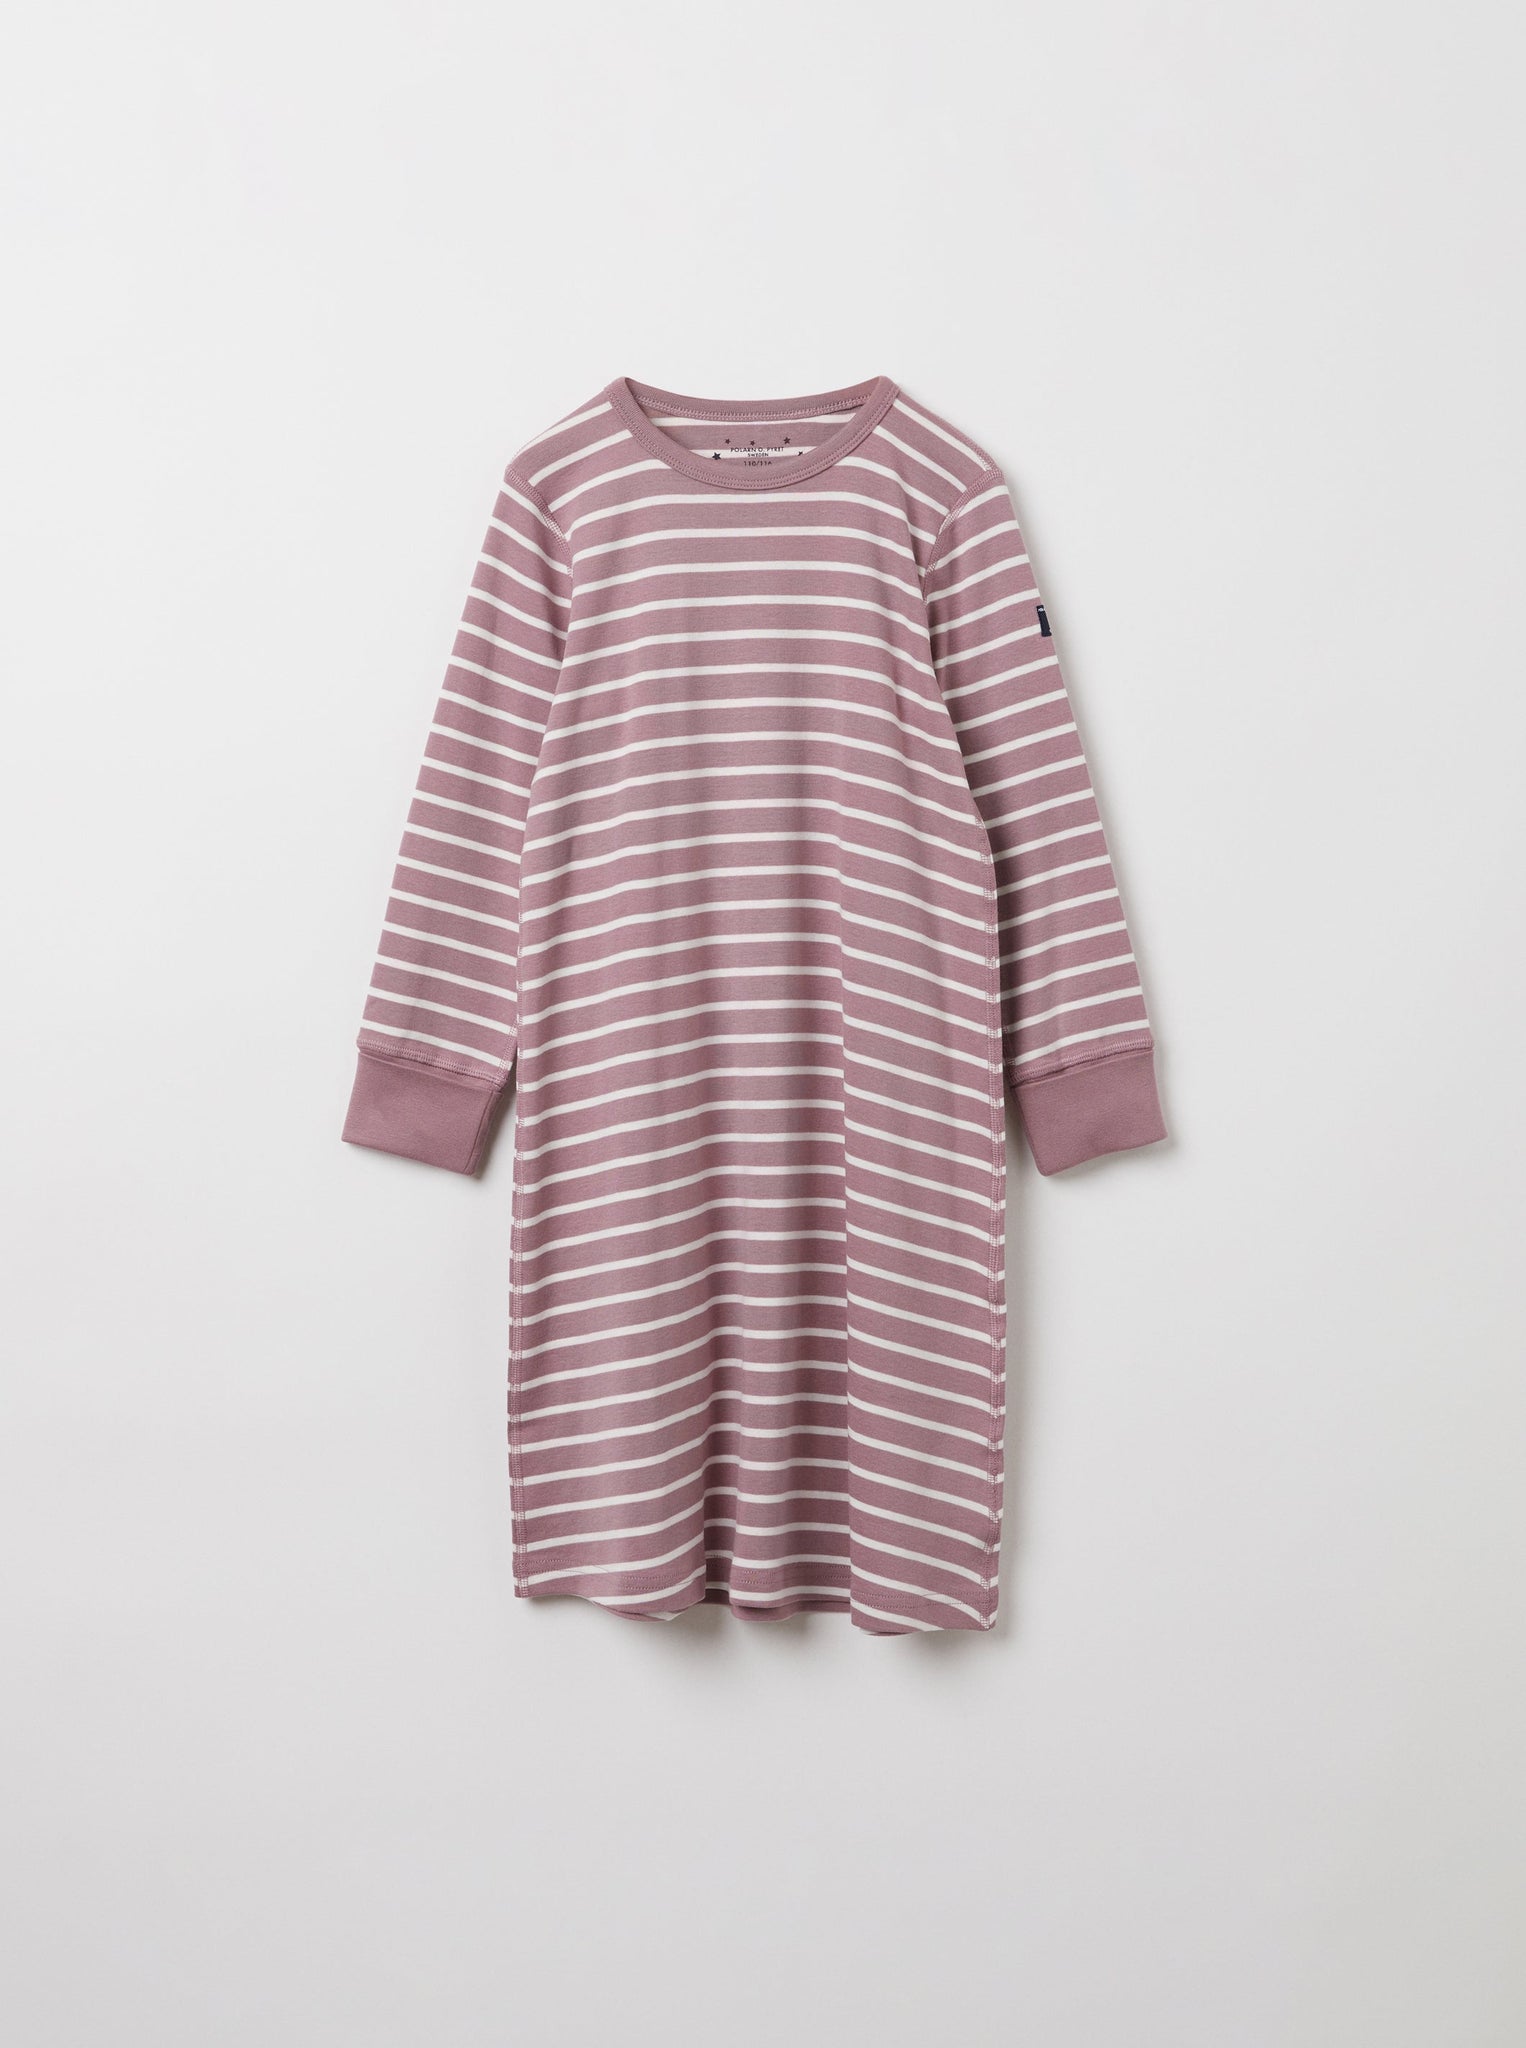 Organic Cotton Purple Adult Nightdress from the Polarn O. Pyret kidswear collection. Clothes made using sustainably sourced materials.